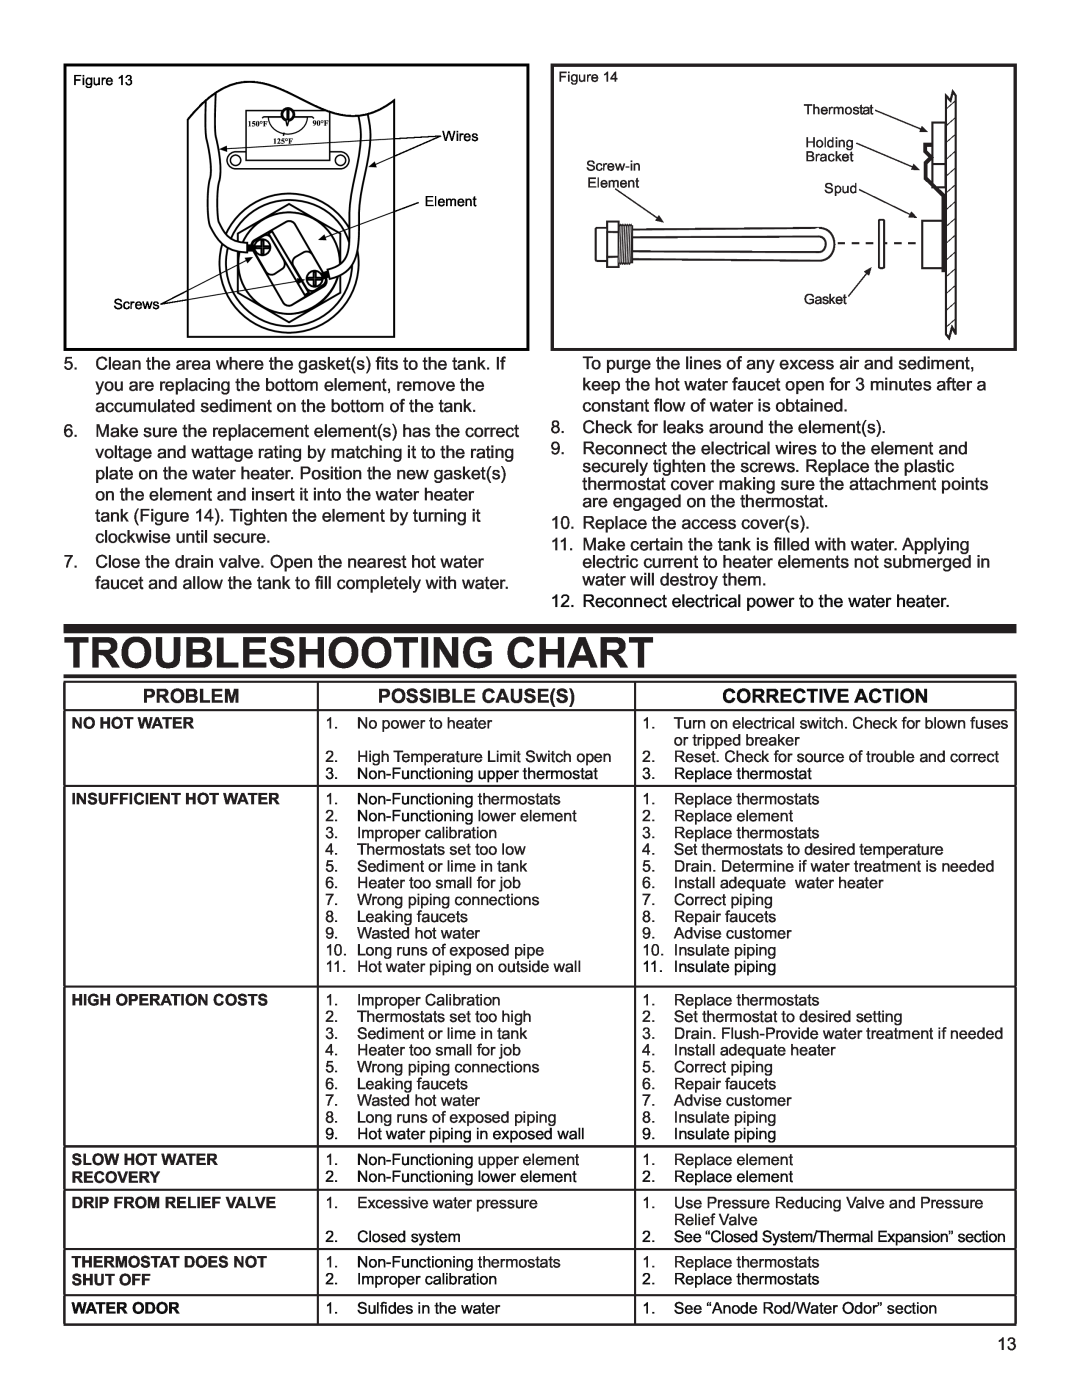 Whirlpool E2F80HD045V, E2F50HD045V, E2F65HD045V, 6510413 Troubleshooting Chart, Problem, Possible Causes, Corrective Action 